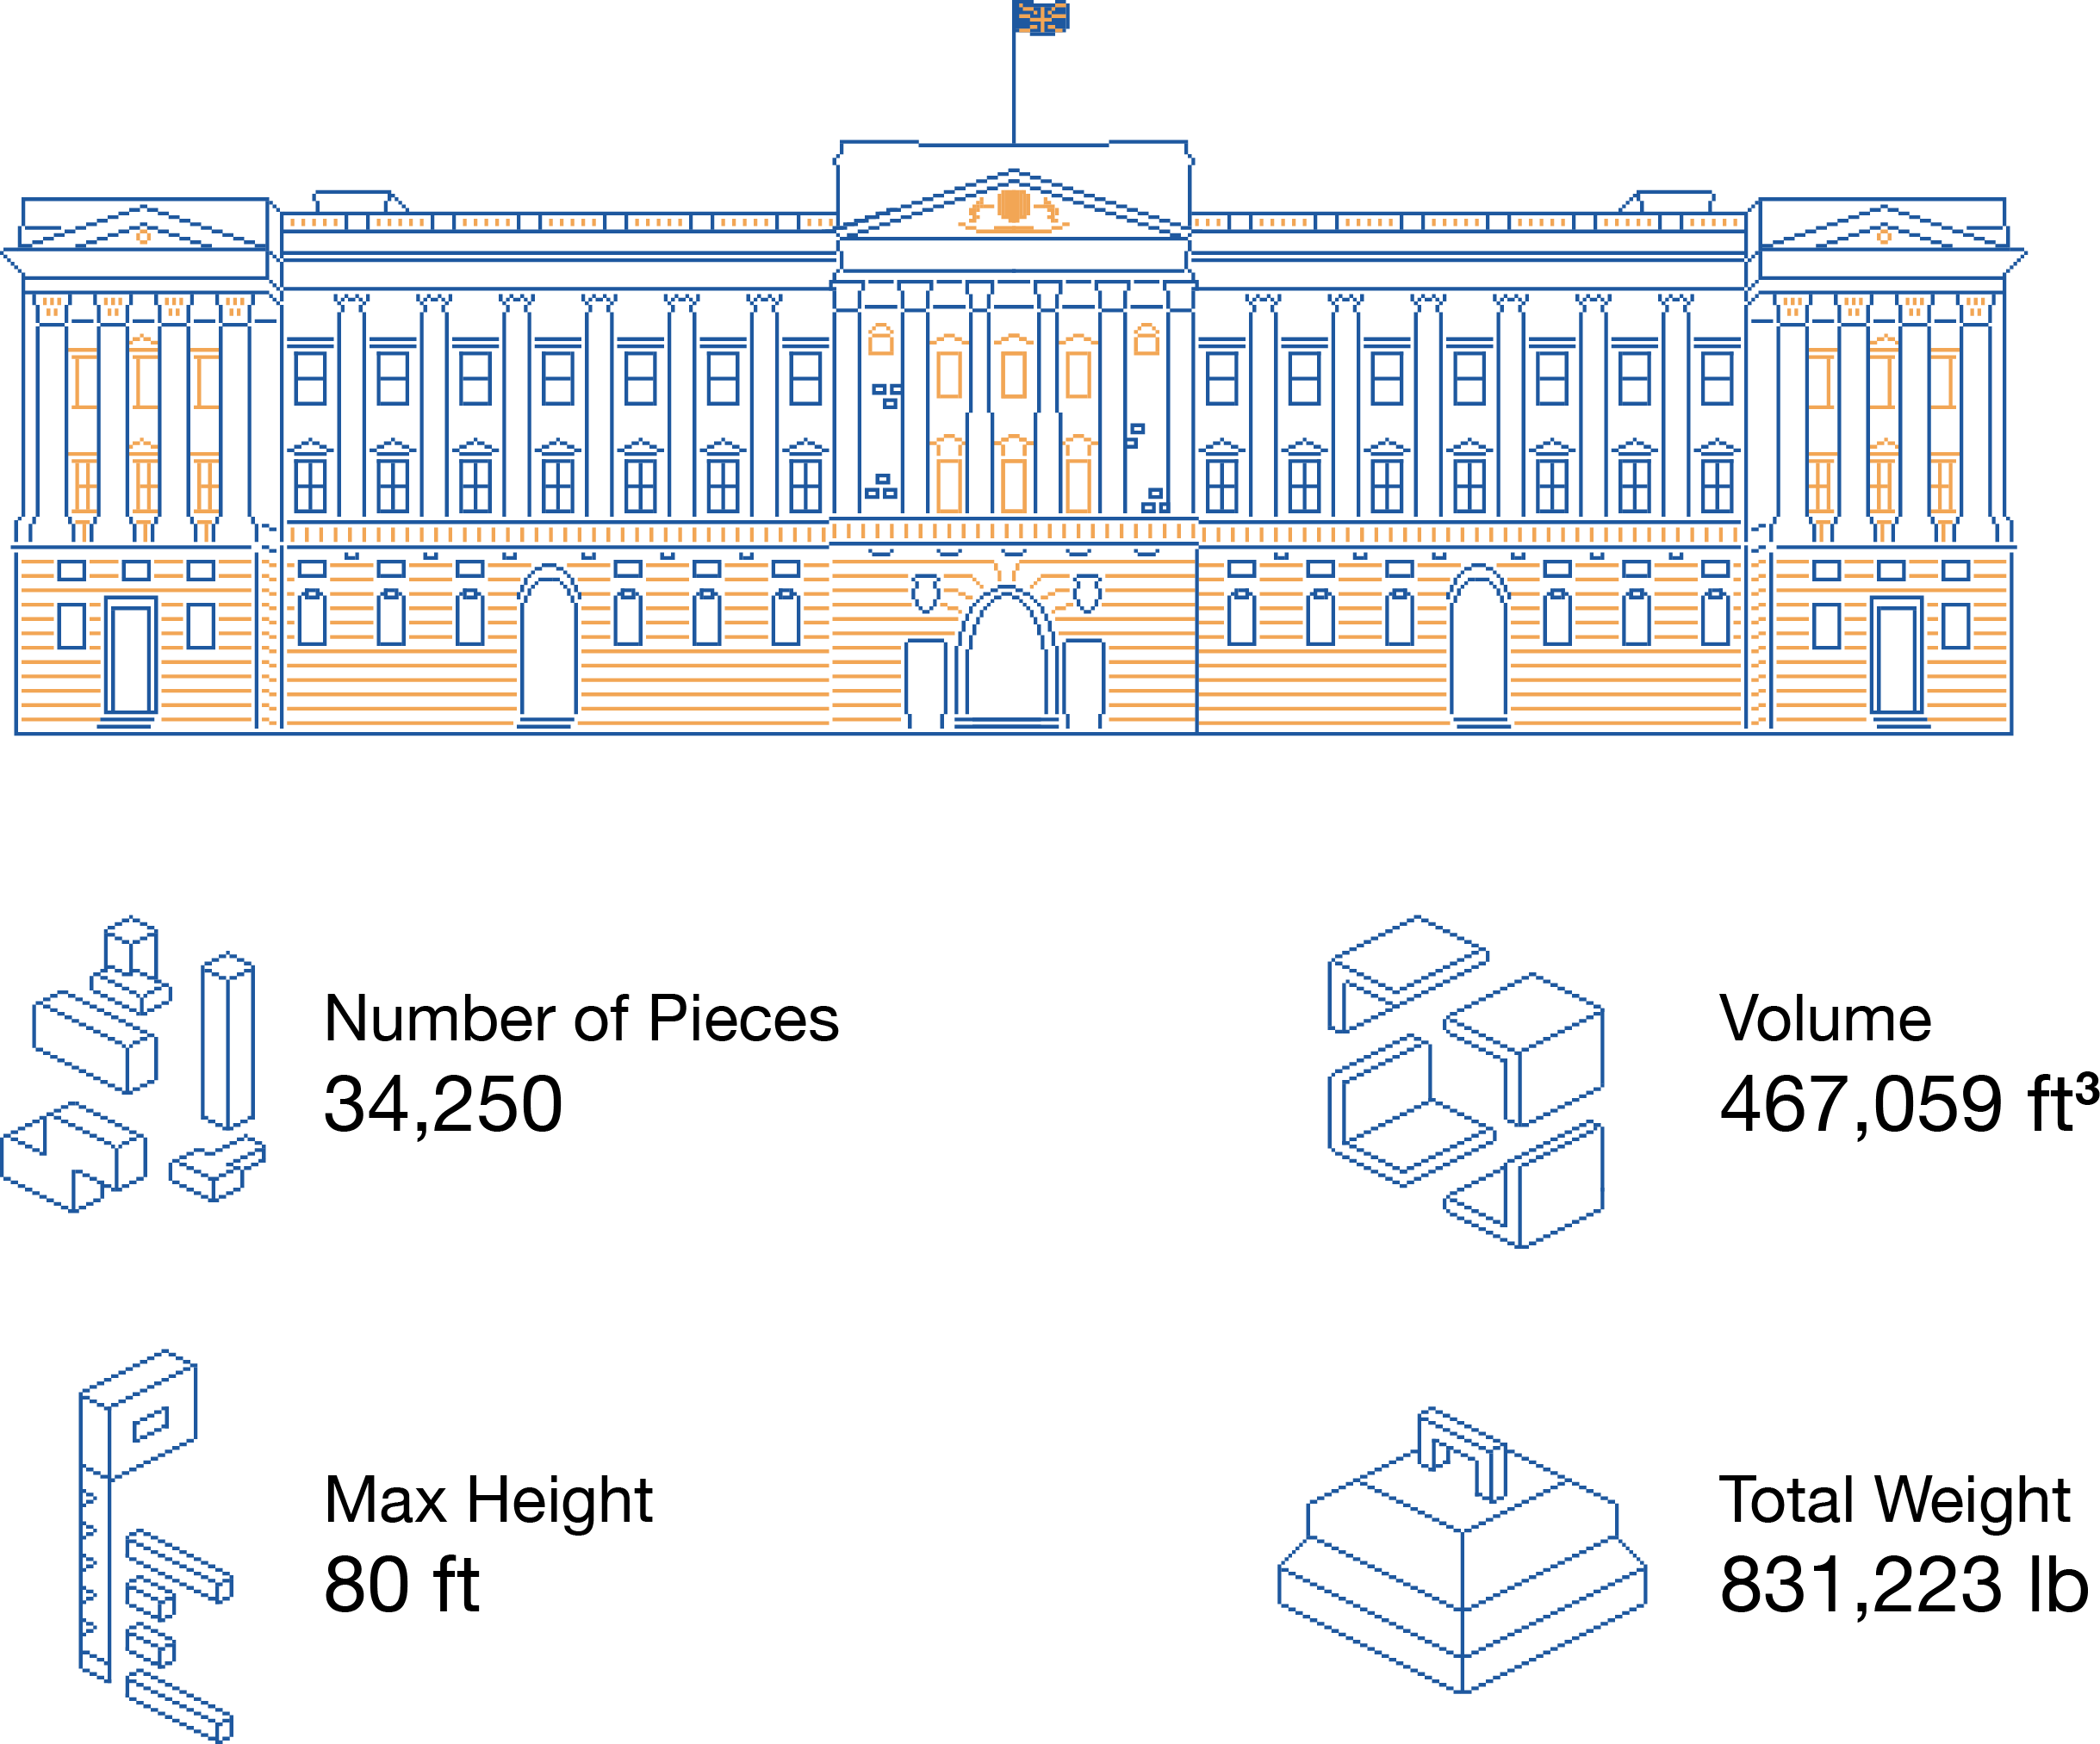 Estimated scaffolding requirement for the Buckingham Palace.